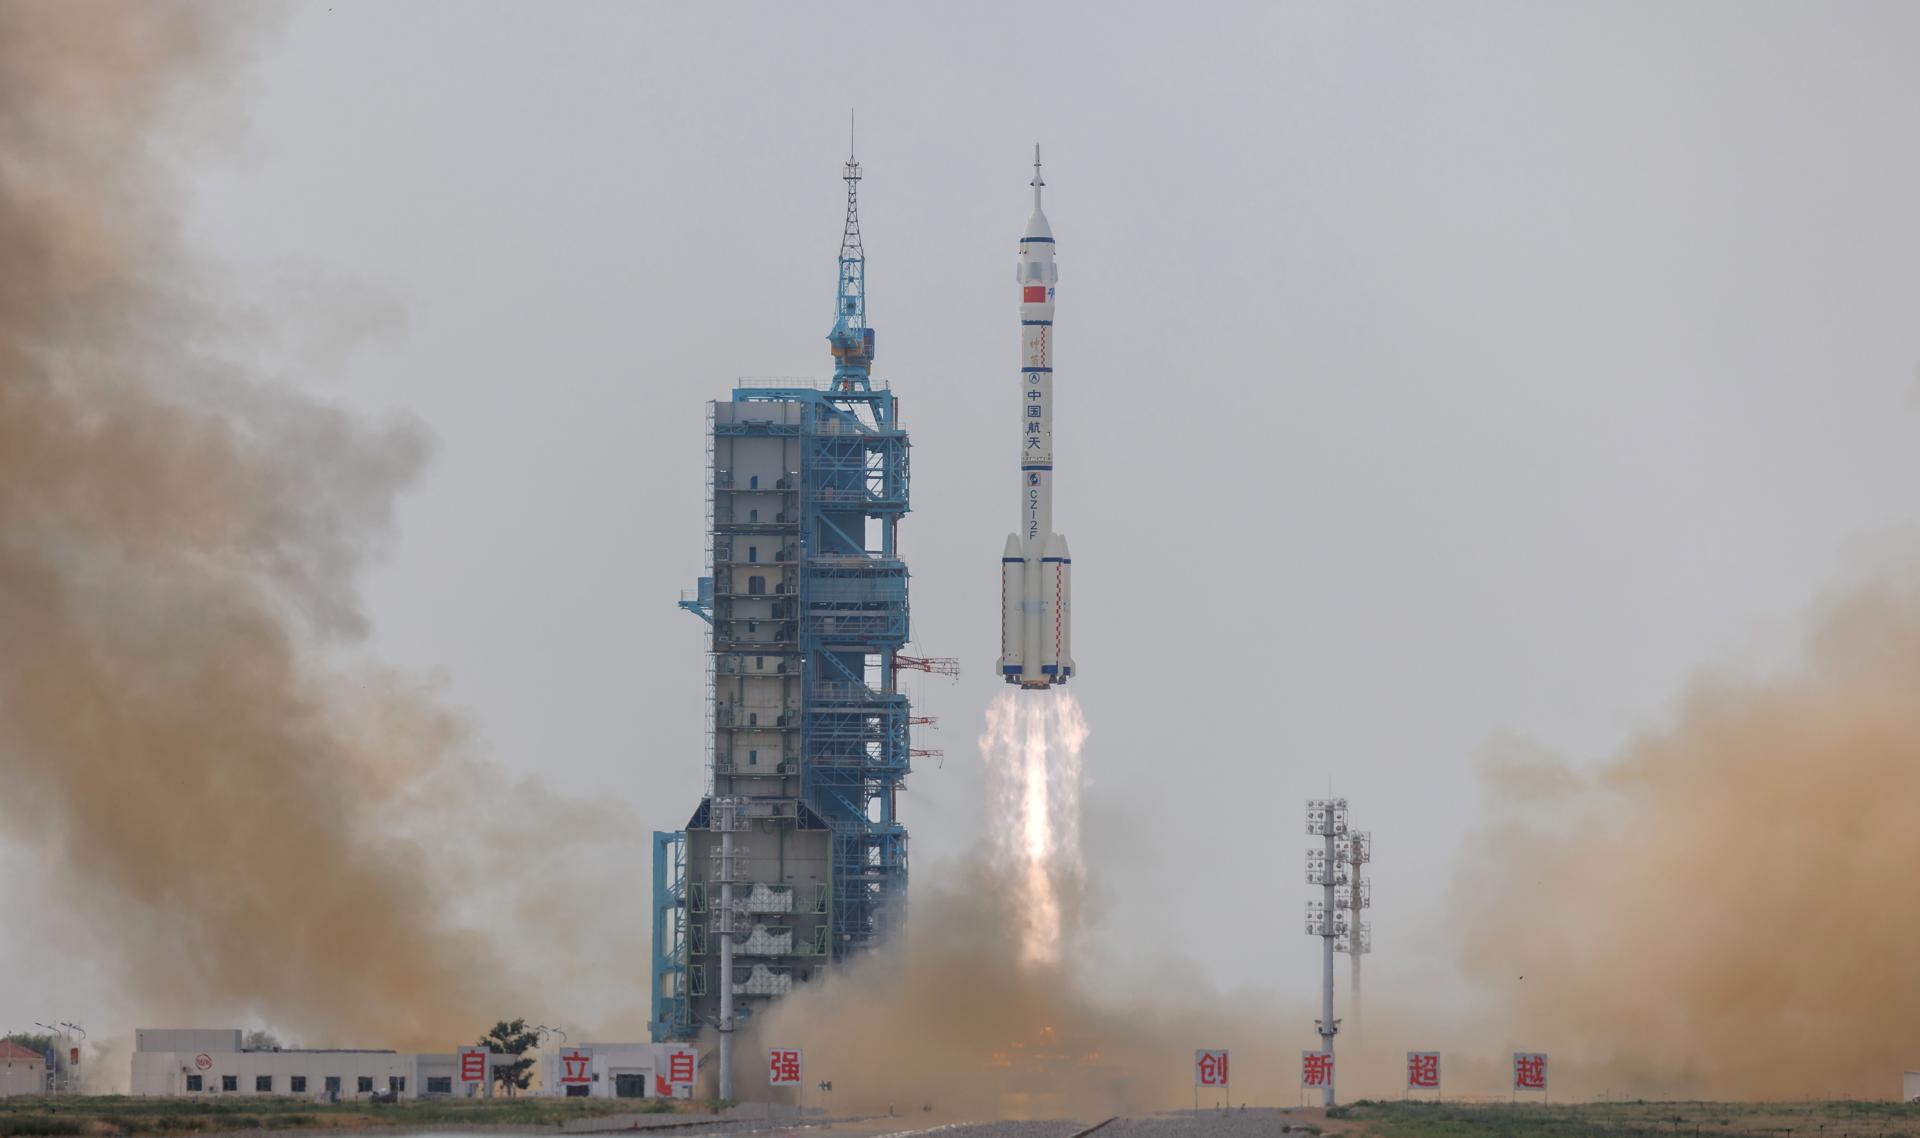 A Long March-2F carrier rocket with a Shenzhou-16 manned space flight lifts off during launch at the Jiuquan Satellite Launch Centre, in Jiuquan, Gansu province, China, 30 May 2023. The Shenzhou-16 manned space flight mission will transport three Chinese astronauts to the Tiangong space station. EFE-EPA/ALEX PLAVEVSKI